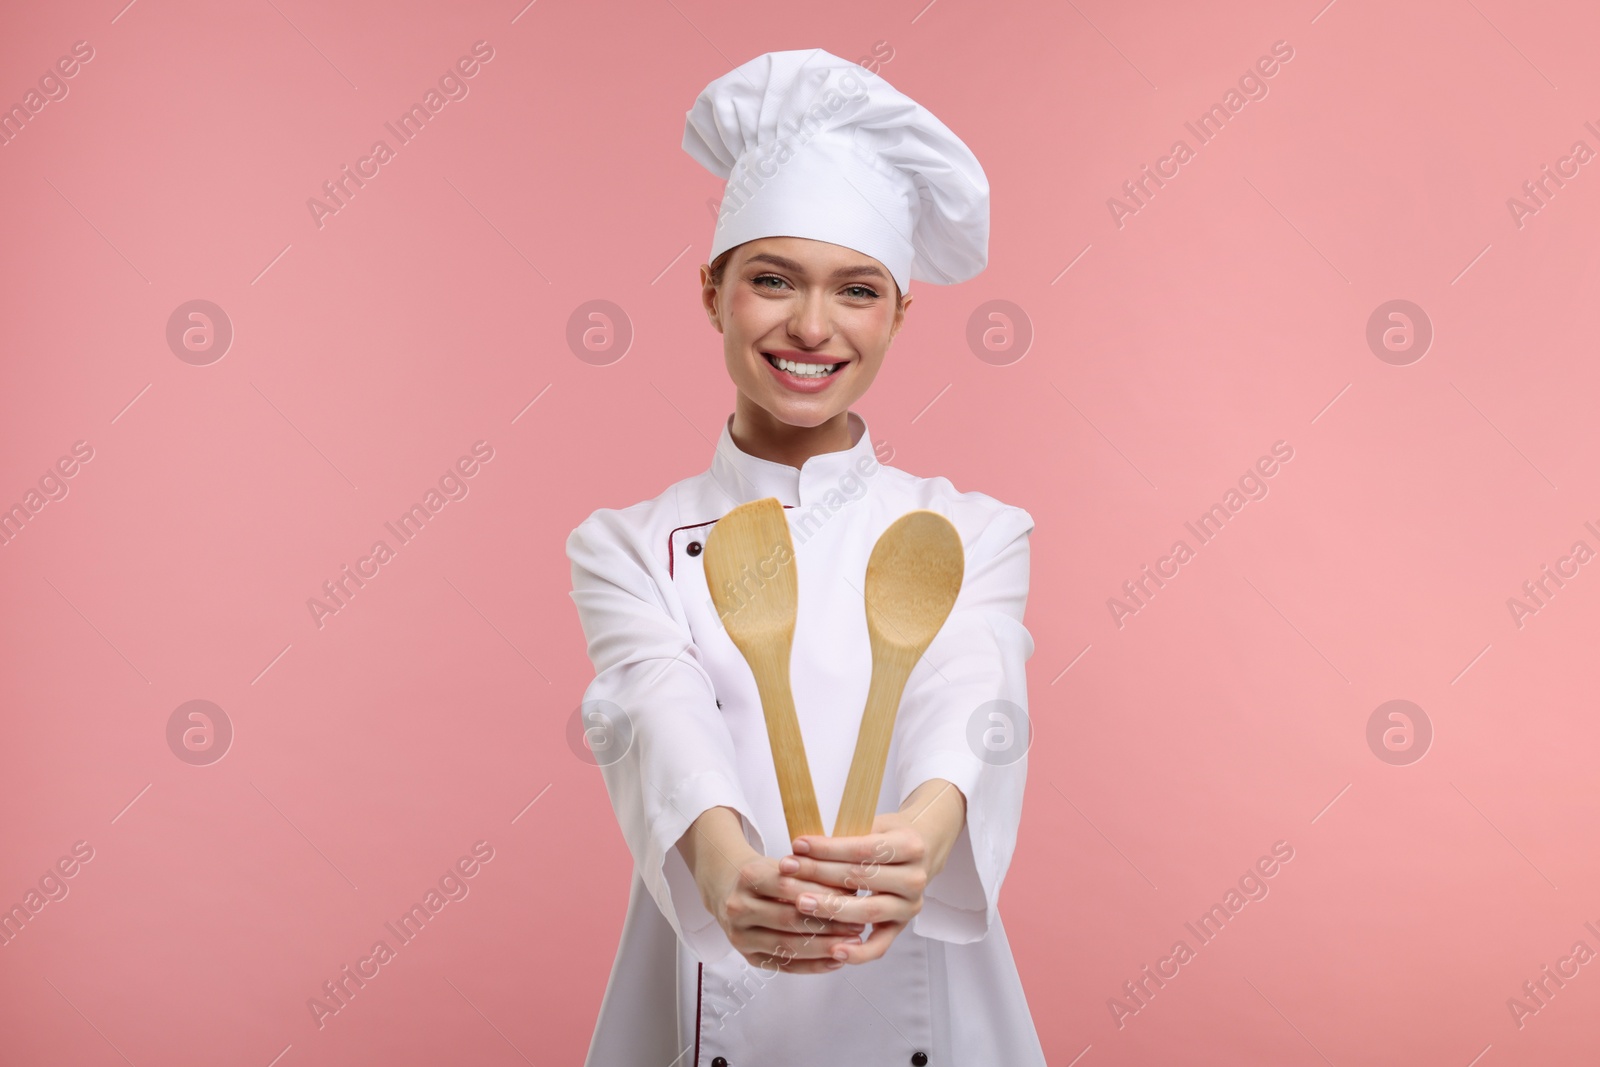 Photo of Happy chef in uniform holding wooden spatula and spoon on pink background